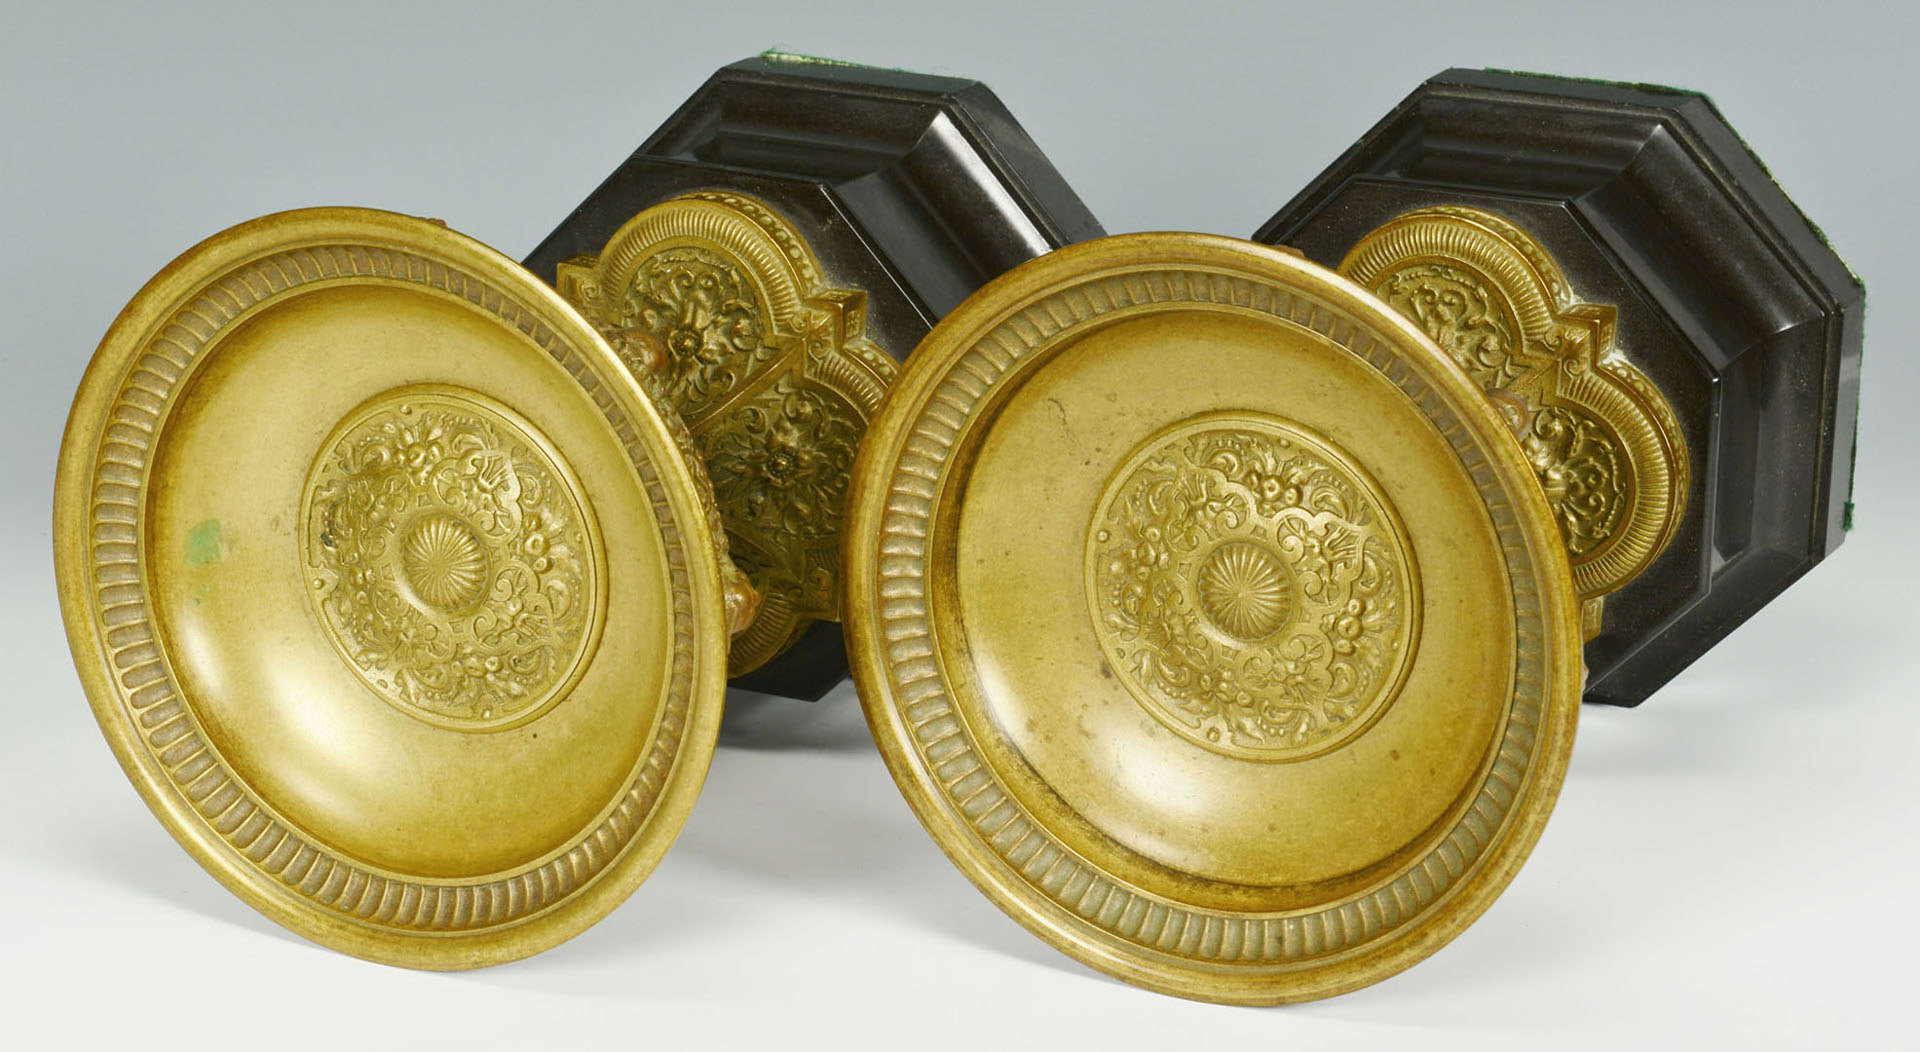 Lot 28: Pr. Classical Bronze Urns Mounted on Black Bases